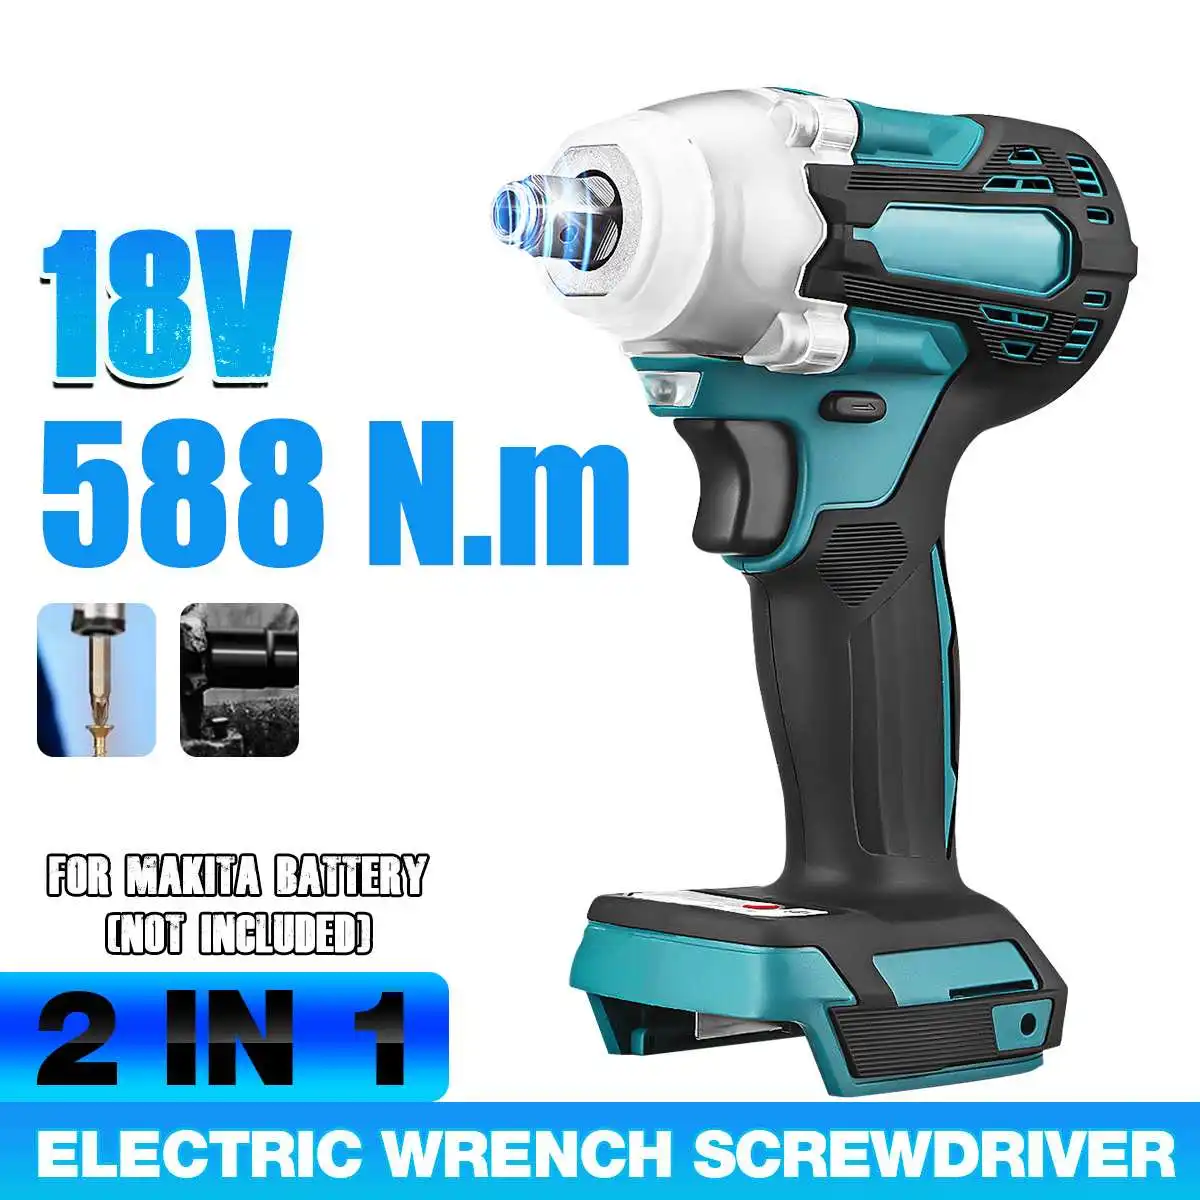 

Drillpro 588N.m Cordless Brushless Impact Electric Wrench 1/2" Wrench Drill Screwdriver Power Tool Compatible Makita 18V Battery